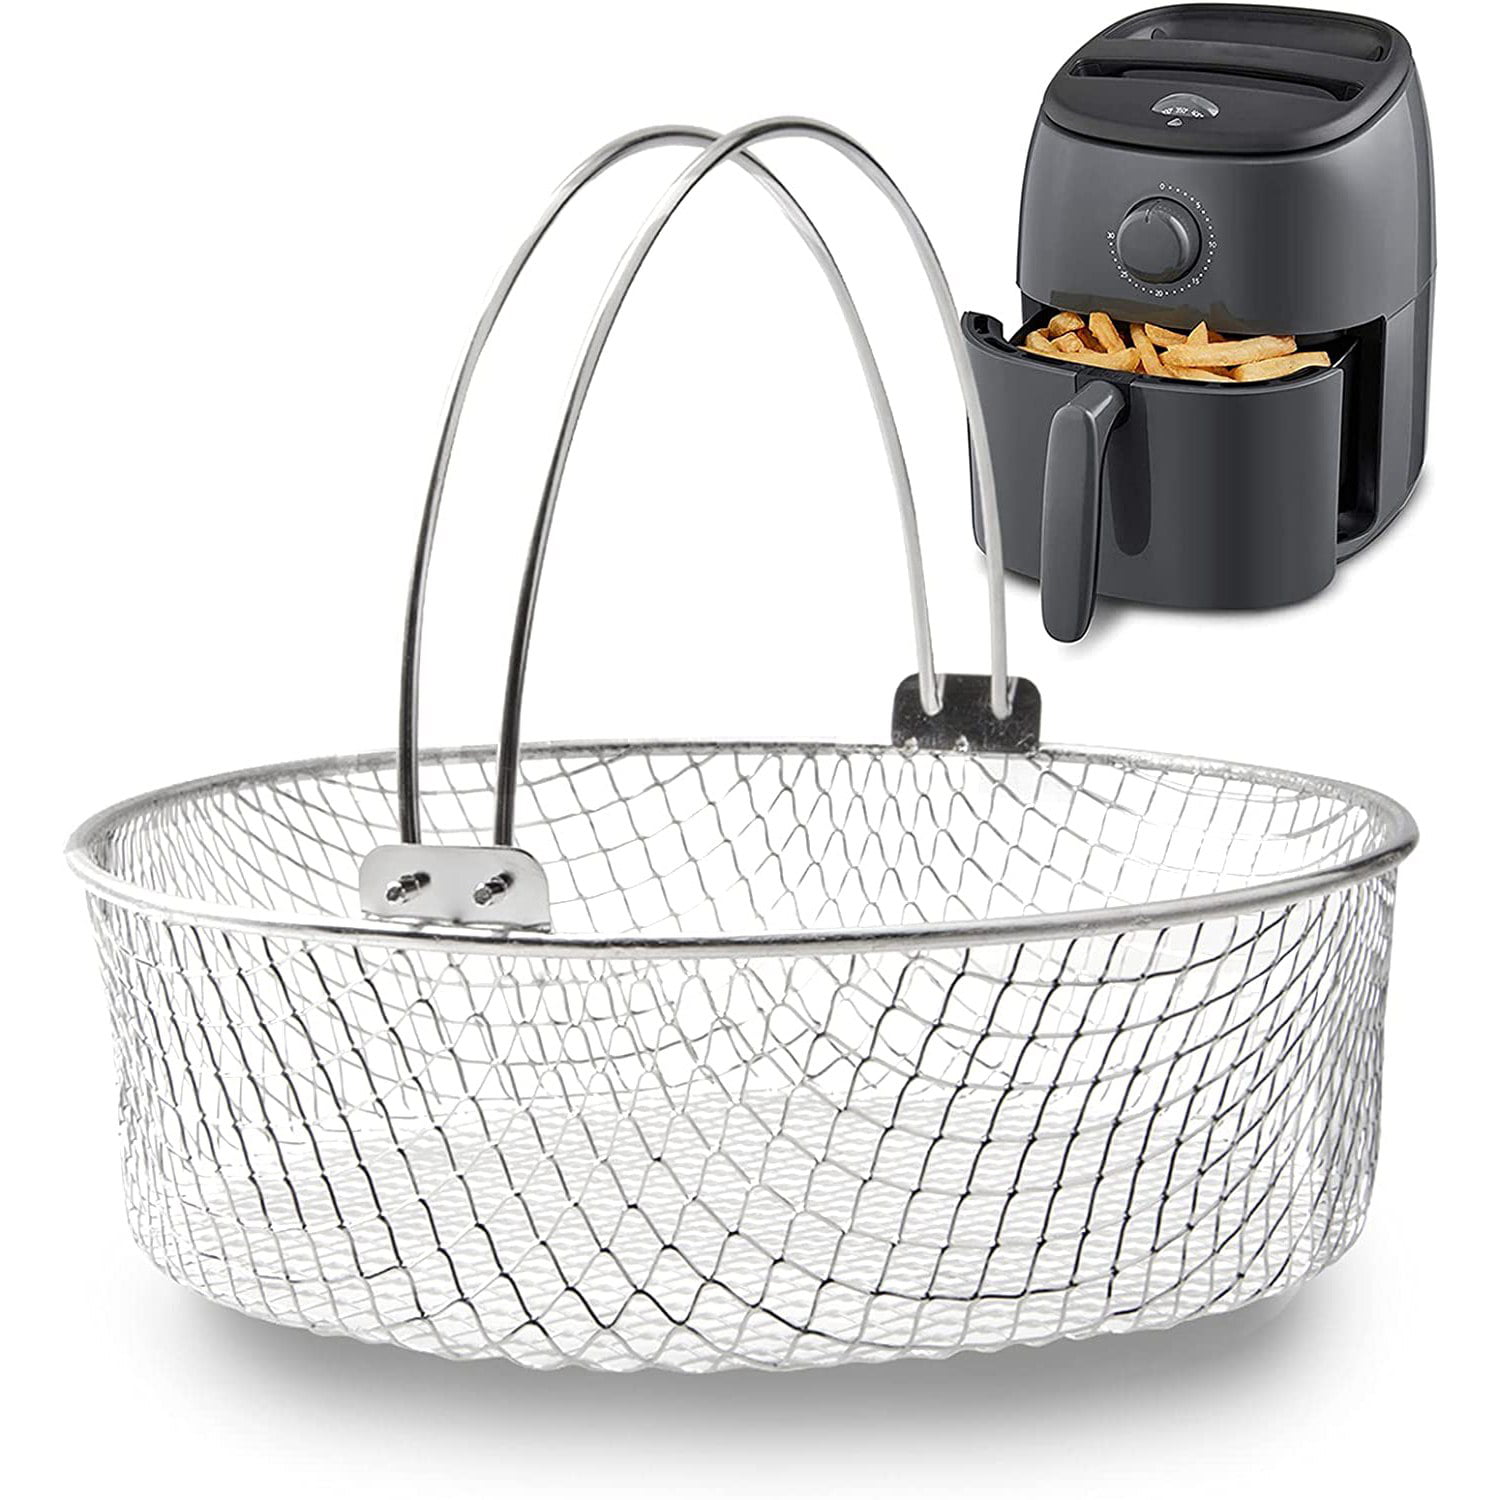 Generic iSH09-M529946mn Air Fryer Basket for Oven,Stainless Steel